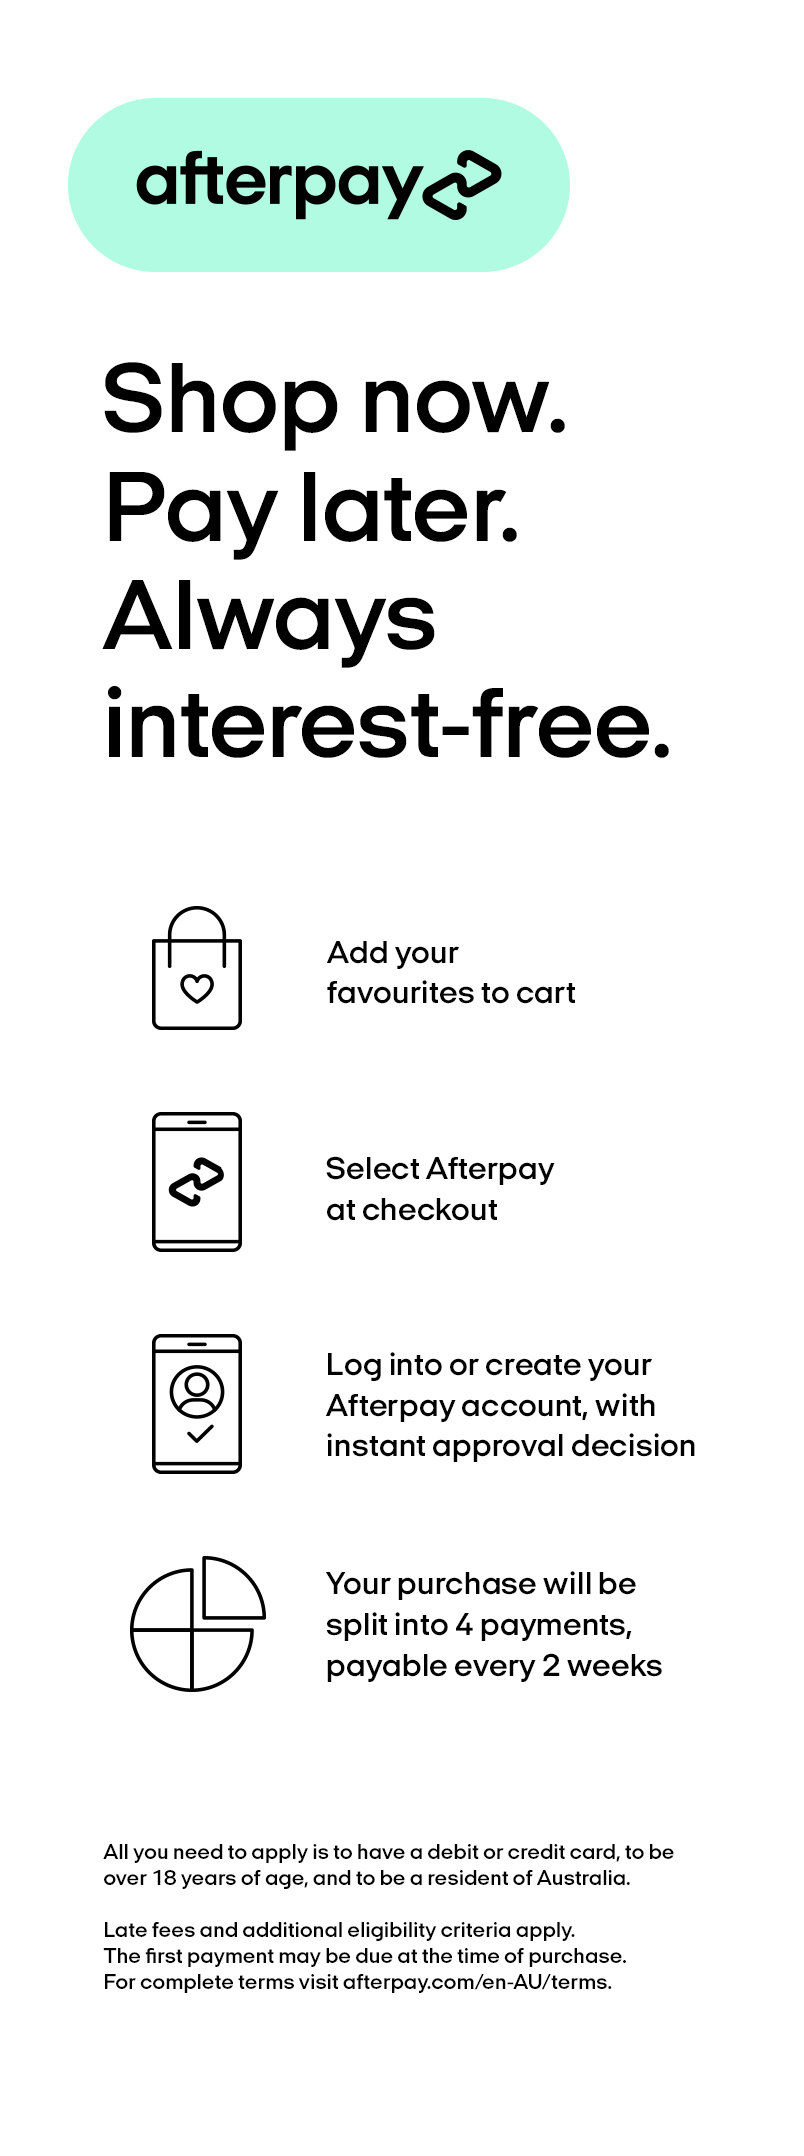 For Afterpay terms, go to afterpay.com/en-AU/terms